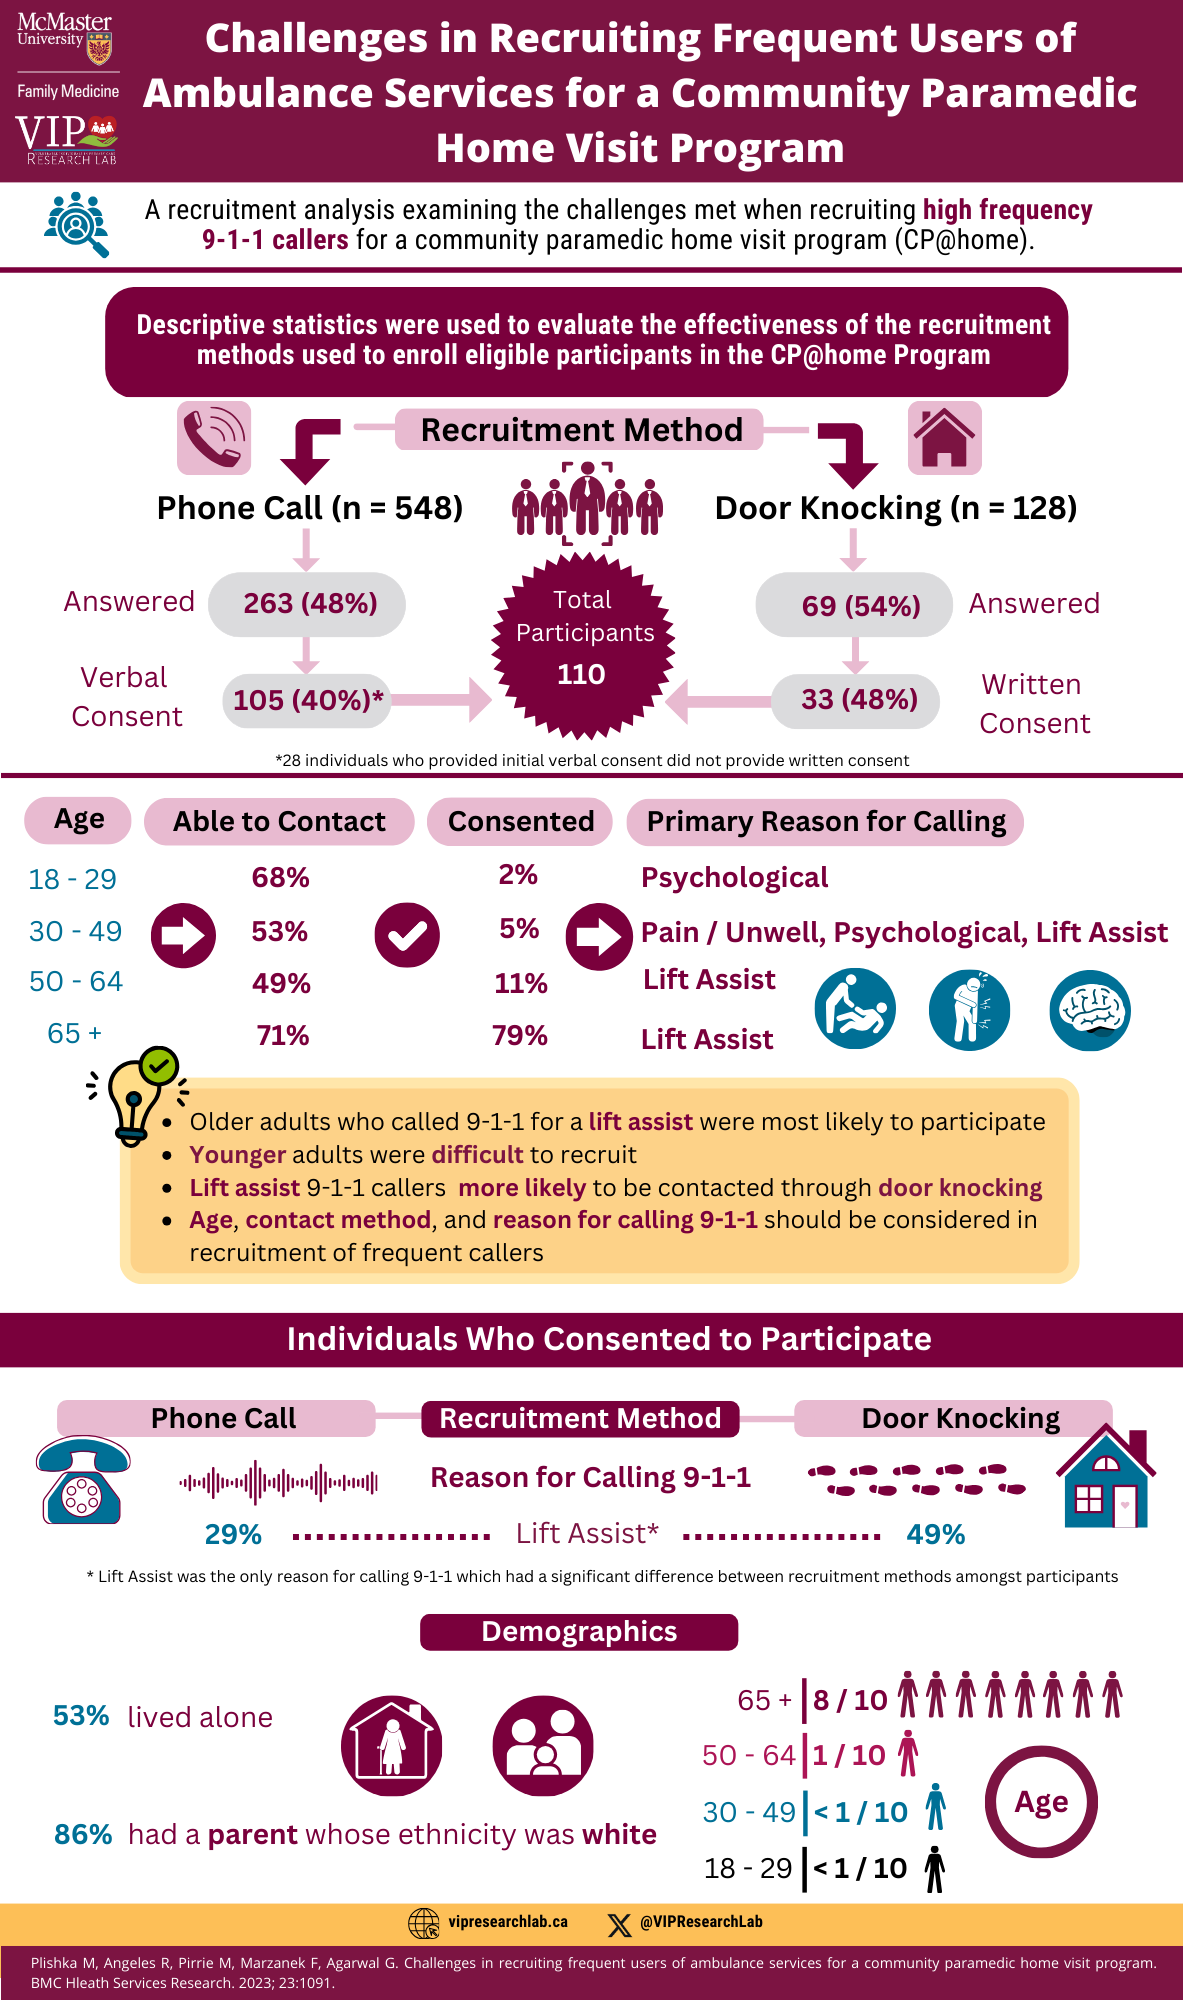 At the top of the page is a burgundy banner with the title of the infographic Challenges in Recruiting Frequent Users of Ambulance Services for a Community Paramedic Home Visit Program. To the left of the title are the logos for McMaster University Family Medicine and VIP Research Lab. Below that is text saying A recruitment analysis examining the challenges met when recruiting high frequency 9-1-1 callers for a community paramedic home visit program (CP@home) with a blue icon of a magnifying glass magnifying a person in a crowd. Below that is text written on a burgundy banner saying Descriptive statistics were used to evaluate the effectiveness of the recruitment methods used to enroll eligible participants in the CP@home Program. Below that is a flow chart with the title Recruitment Method. To its right are an icon of a house and an arrow pointing downward to the text saying Door Knocking (n=128), with another arrow pointing down to 69 (54%) Answered and another arrow pointing down to 33 (48%) Written Consent. An arrow from the last text points to the middle of the page to a circular burgundy badge with text saying Total Participants 110 on it. Above that is an icon of 5 people standing beside one another. To the left of the Recruitment Method subheading is an icon of a phone ringing and an arrow pointing downwards to the text saying Phone Call (n = 548), another arrow beneath that saying Answered 263 (48%), and another arrow pointing down to Verbal Consent 105 (40%)*. The * appears at below this with text beside it saying 28 individuals who provided initial verbal consent did not provide written consent. An arrow beside Verbal Consent 105 (40%)* also points to the badge in the middle of the page which says Total Participants 110. In the middle of the page is a section with four columns that state Age, Able to Contact, Consented, and Primary Reason for Calling from left to write. There are 4 rows below this. The first row indicates that for the age group 18-29, it was possible to contact 68% of them, 2% consented, and psychological was the primary reason for calling. Below that for the age range 30-49, 53% were contacted, 5% consented, and being in pain/unwell, psychological, and Lift Assist was listed as the primary reason for calling. The next row represents the age group 50-64 and indicates that 49% were contacted, 11% consented, and lift assist was the primary reason for calling. The last row represents people over 65 years of age and states that 71% were contacted, 79% consented, and the primary reason for calling was lift assist. To the left of the text are three white icons with blue circular backgrounds. The first icon shows a person helping someone who has fallen to get up. The second one represents a person in pain. The third one is an icon of a brain. Below these rows is a yellow box with a lightbulb icon at the top right. There are four bullet points in this box with text saying Older adults who called 9-1-1 for a lift assist were most likely to participate, Younger adults were difficult to recruit, Lift assist 9-1-1 callers were more likely to be contacted through door knocking, Age, contact method, and reason for calling 9-1-1 should be considered in recruitment of frequent callers. Towards the bottom one-third of the page is a banner with the heading Individuals Who Consented to Participate. Below that in the middle is a subheading that says Recruitment Method, with text below it saying Reasons for Calling 9-11-1 and Lift Assist* below that. To its right is text saying Door Knocking with footsteps and a house icon below it and 49% below that for Lift Assist. To its right is text saying Phone Call with an icon of a telephone and phone ring below that and 29% for Lift Assist beneath that. At the bottom of these is a * with text beside it saying Lift Assist was the only reason for calling 9-1-1 which had a significant difference between recruitment methods amongst participants. Below that is a subheading that says Demographics. Below that, to the left, it says 53% lived alone, and 86% had a parent whose ethnicity was white below that. Towards the center is an icon of an old woman in a house and another icon of a family. To the right are age ranges with icons of people. At the top is 65+ with 8/10 beside it. Beneath that is 50-64 with 1/10 beside it. Below that is 30-49 with